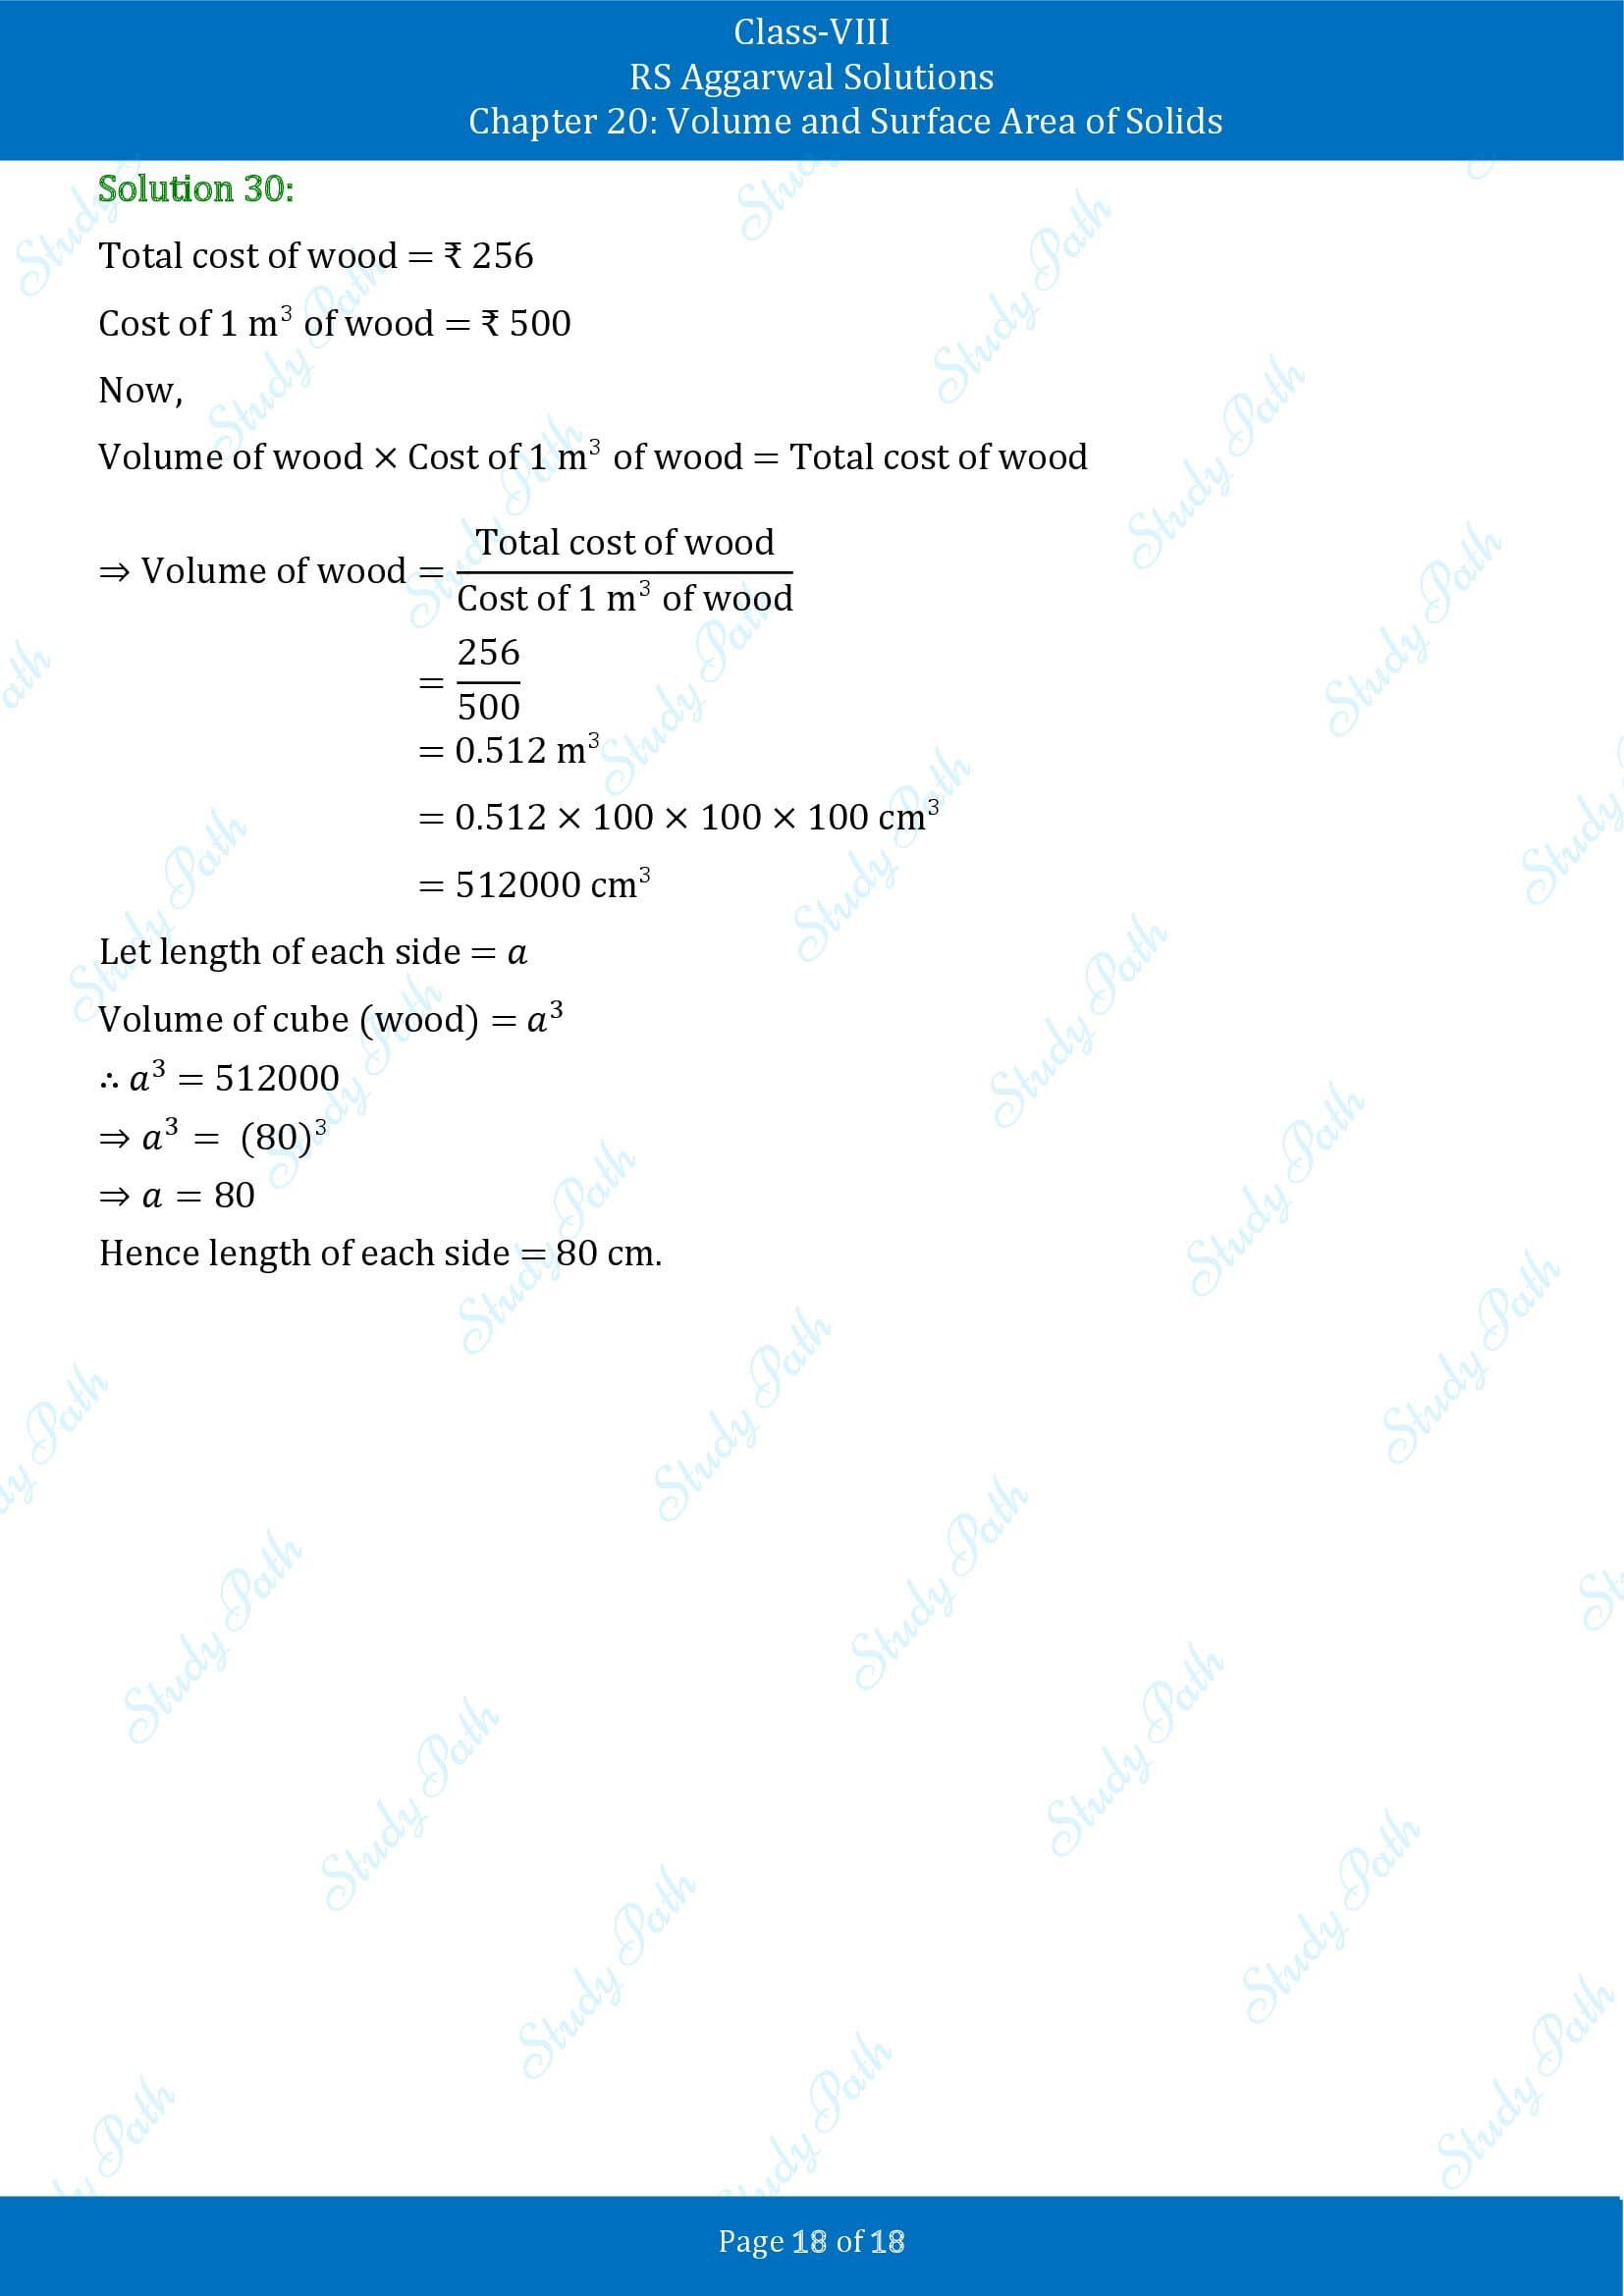 RS Aggarwal Solutions Class 8 Chapter 20 Volume and Surface Area of Solids Exercise 20A 00018